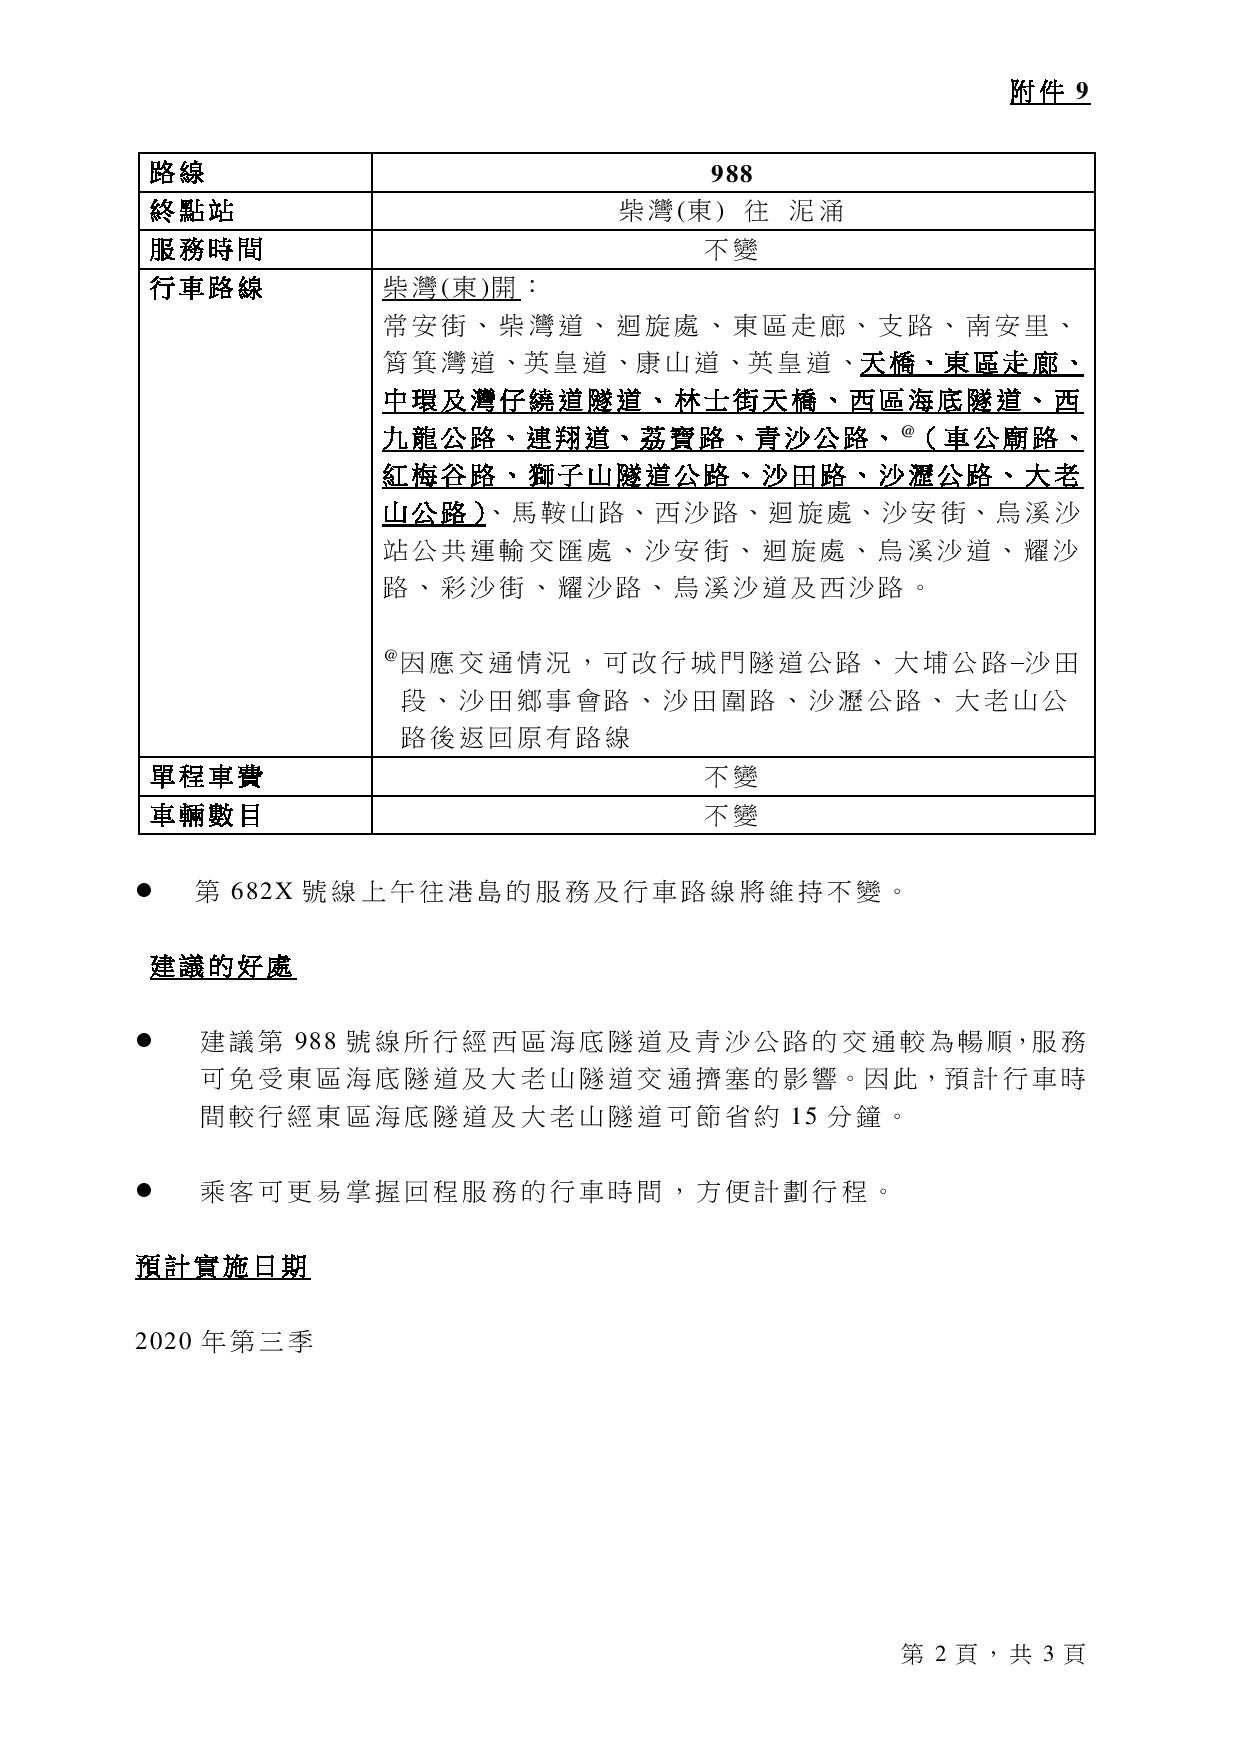 Document-page-037.jpg